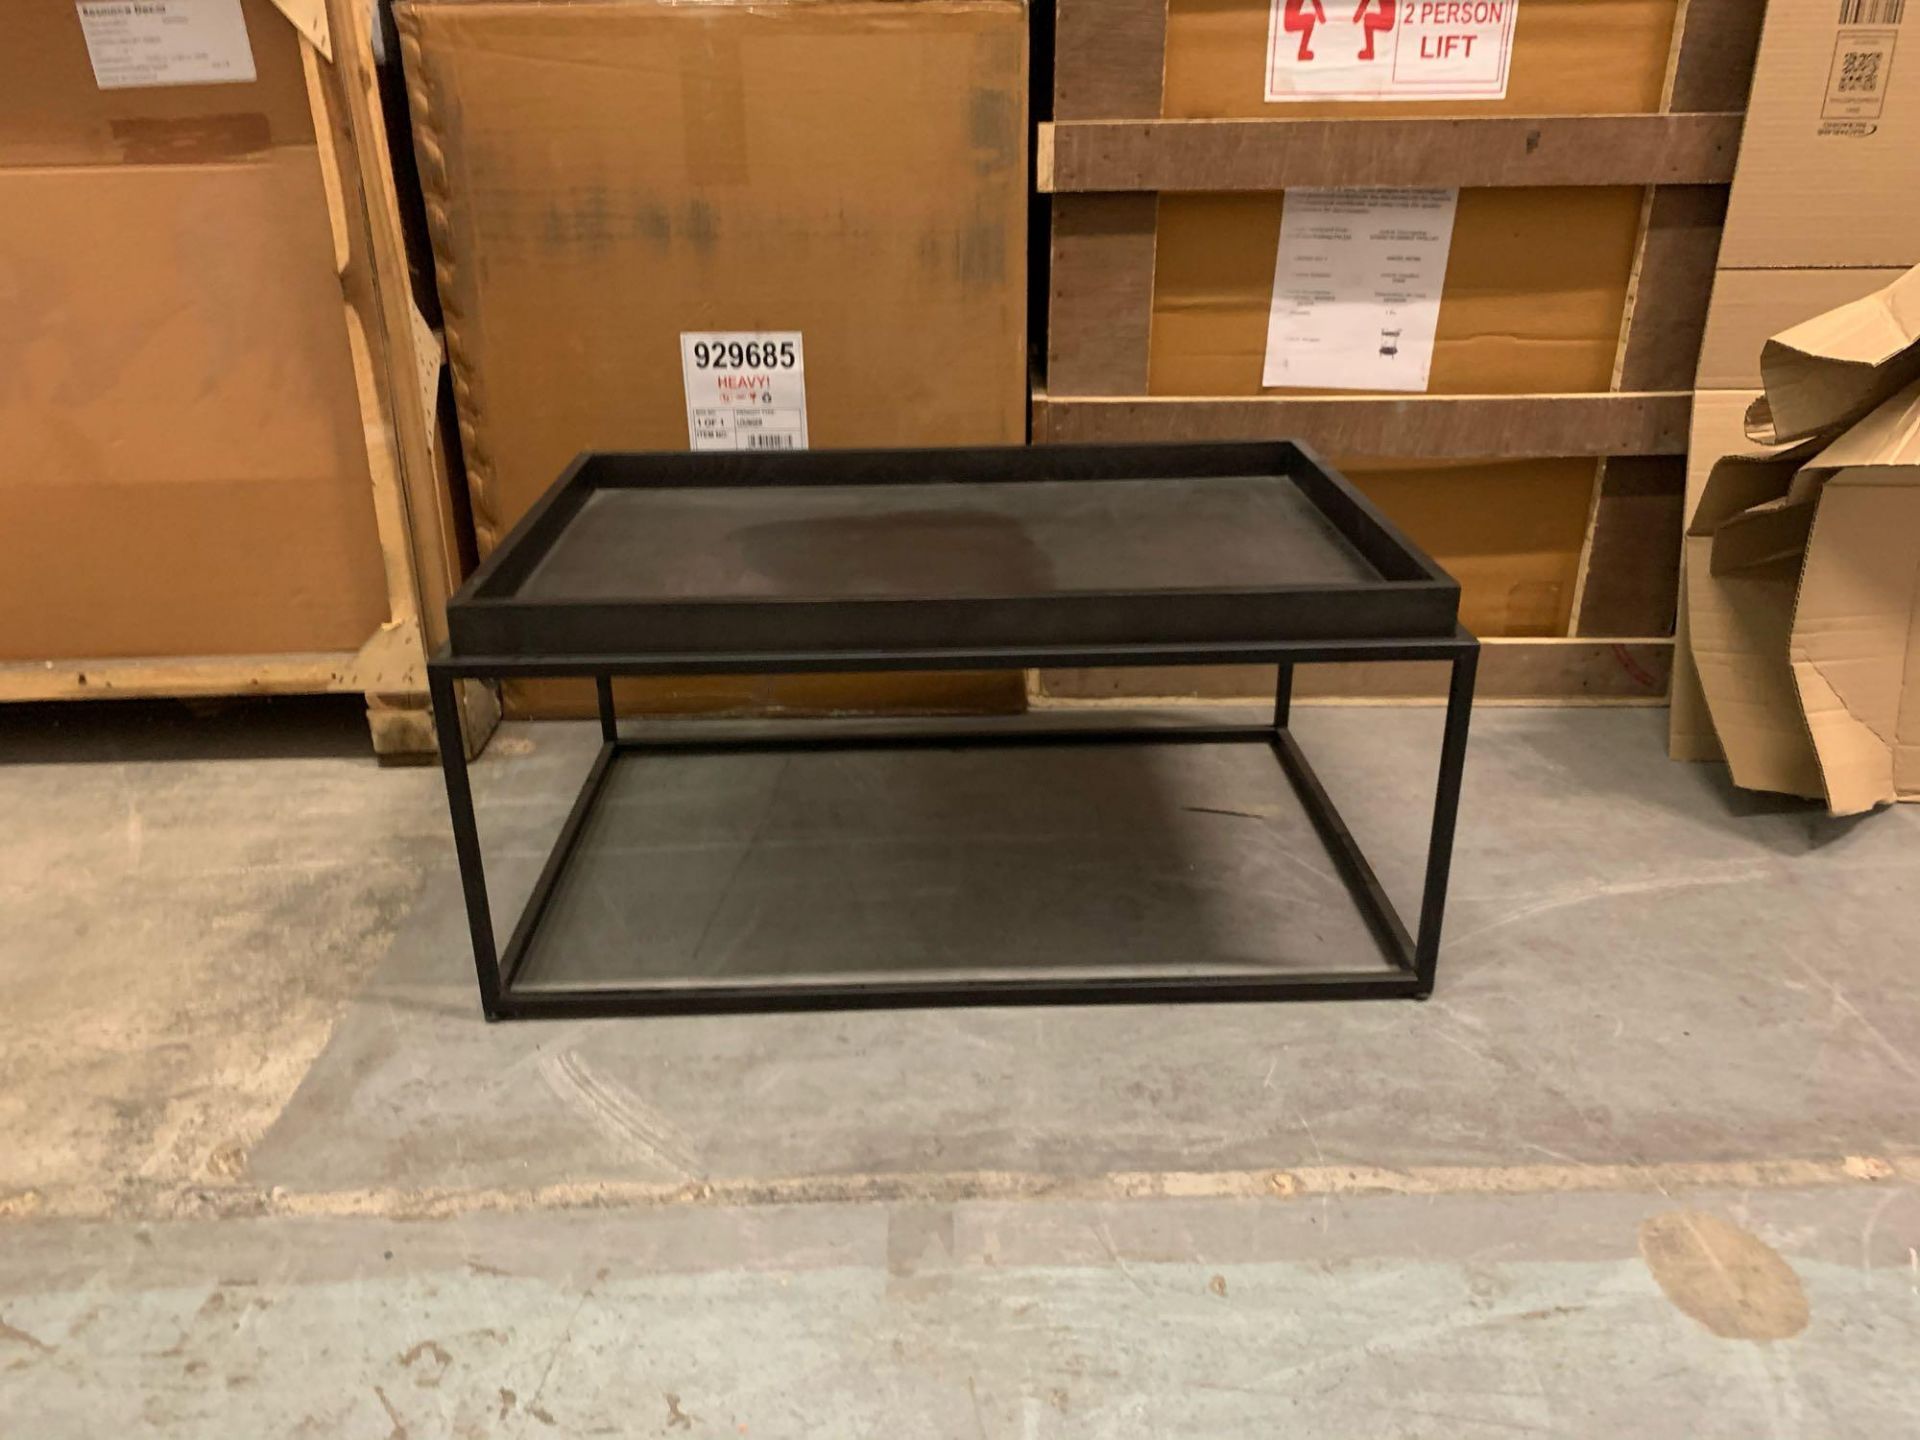 Forden Tray Coffee Table Black The Forden Black Side Table Completed With A Practical Tray Top Table - Bild 5 aus 8